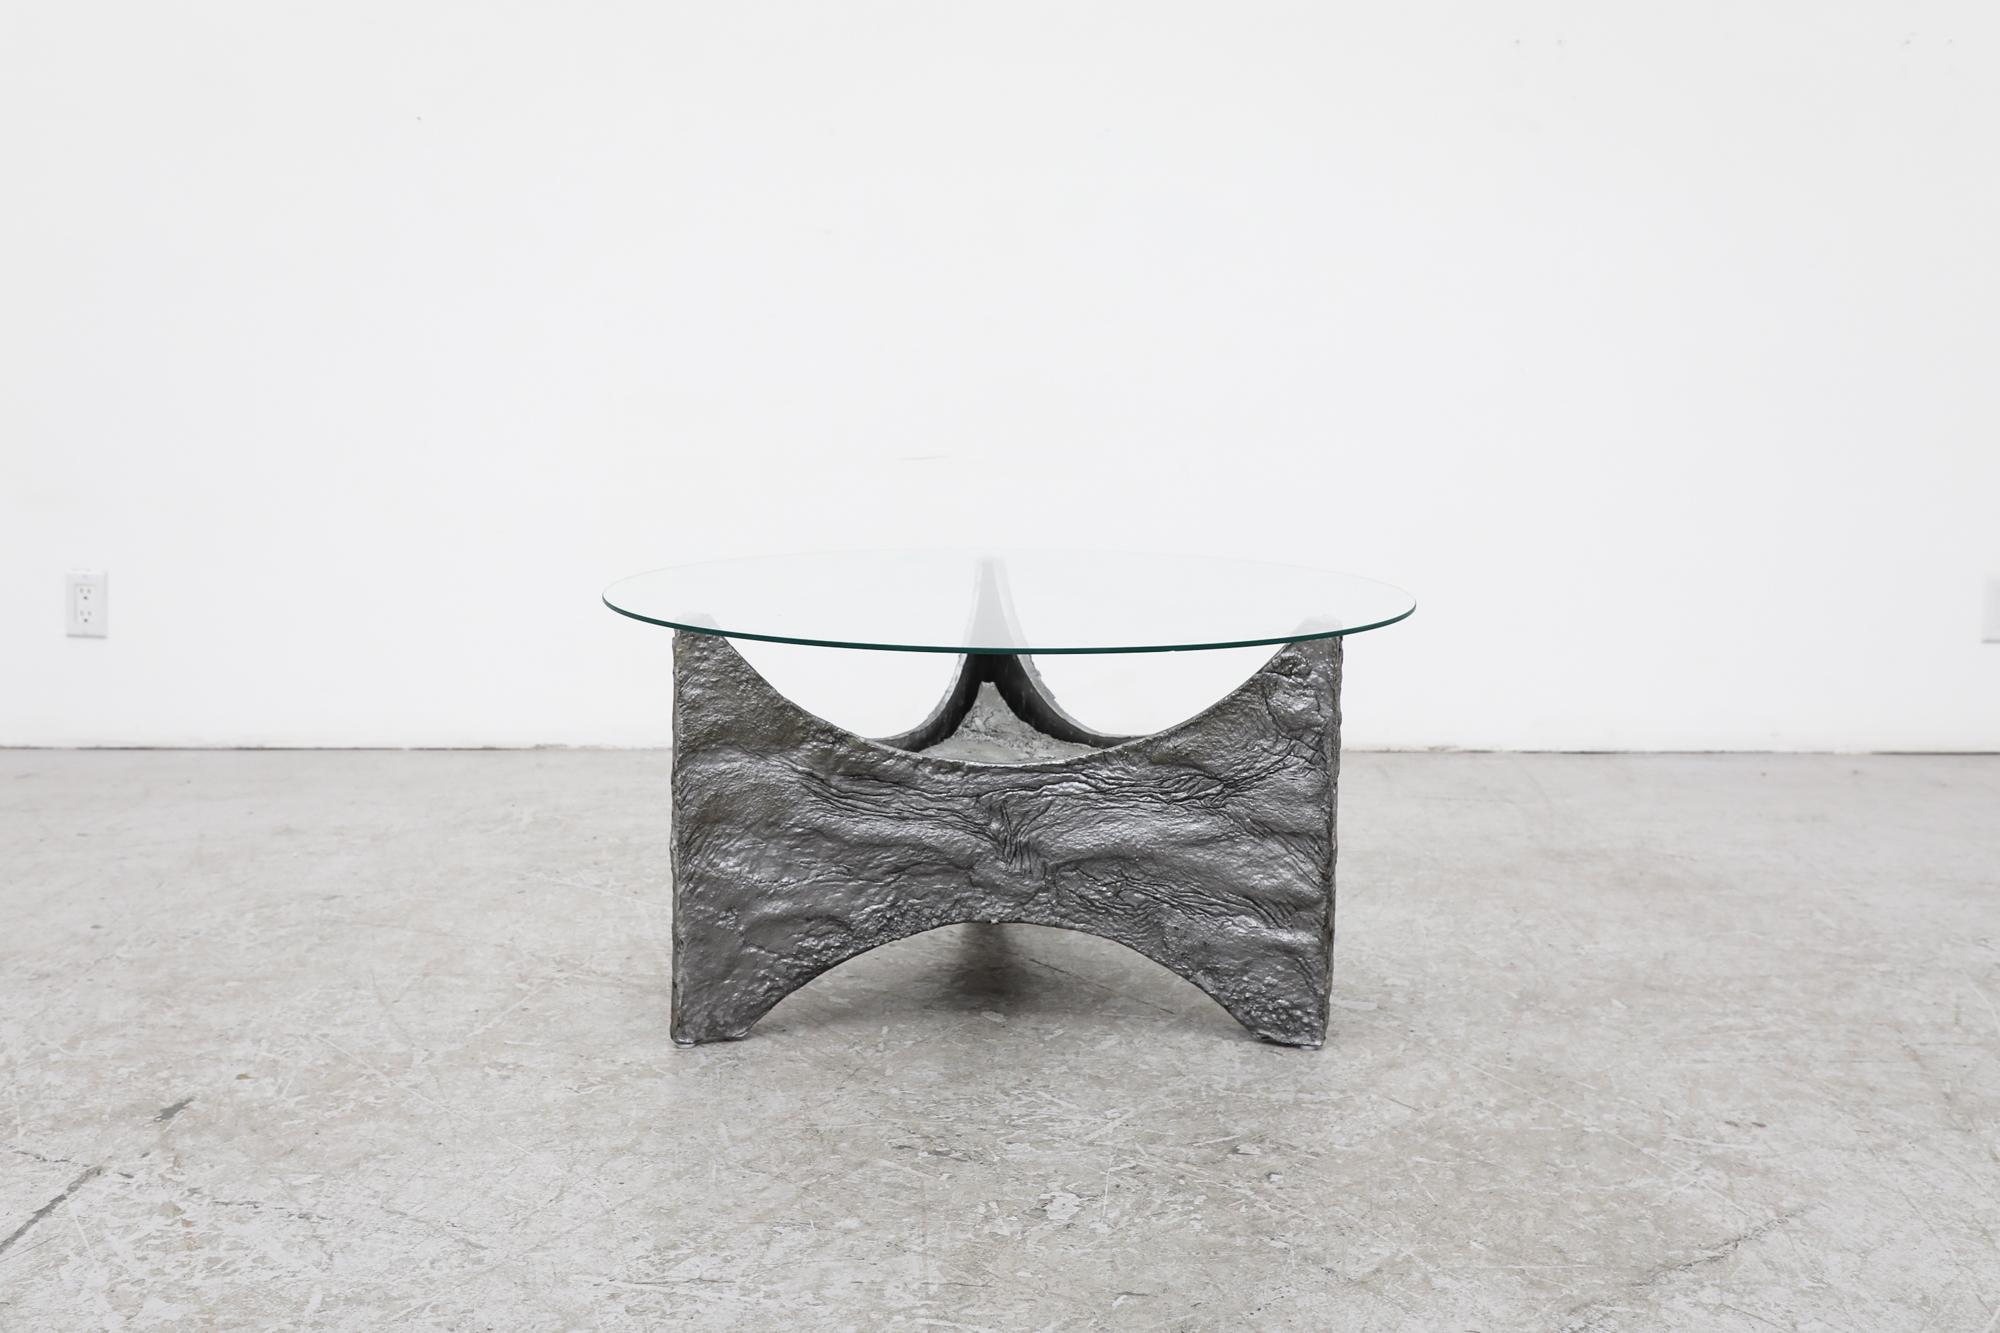 Brutalist Paul Evans inspired vintage coffee table with new round glass top and sculptural base. Black feet pads on base. In original condition with visible wear consistent with its age and use.